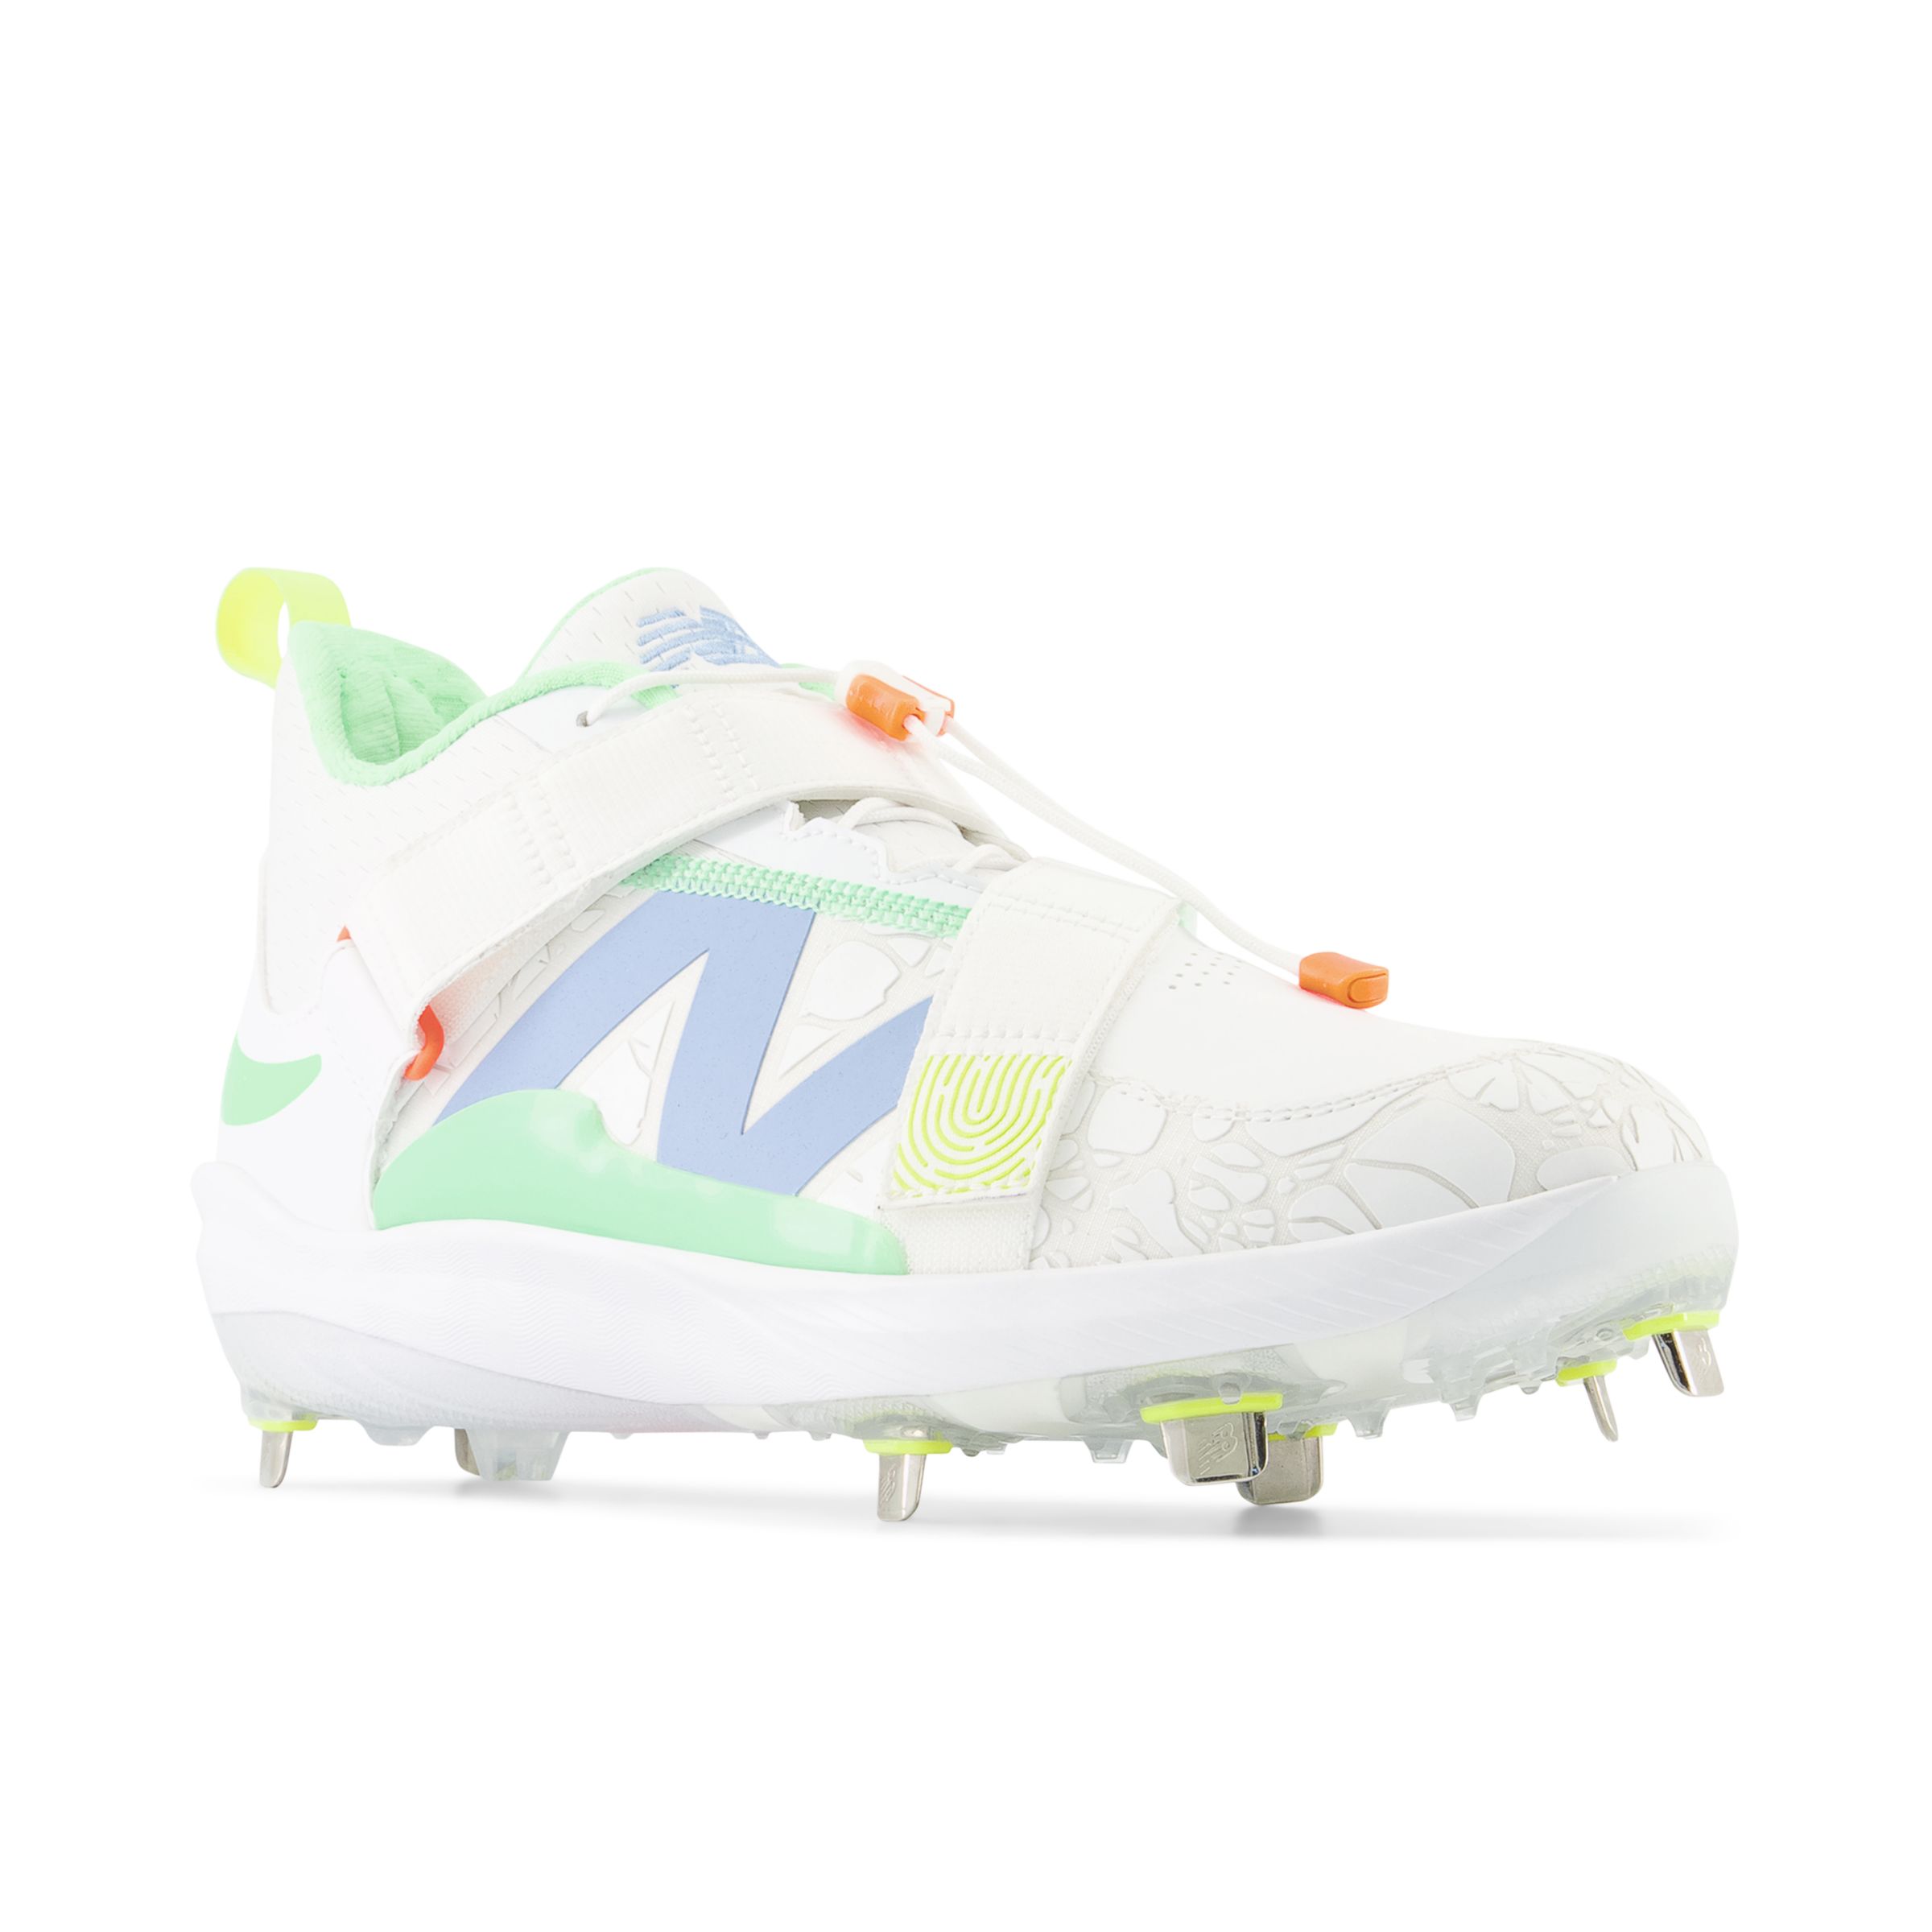 New Balance Lindor Collection - Baseball Cleat in White - New Balance Press  Box